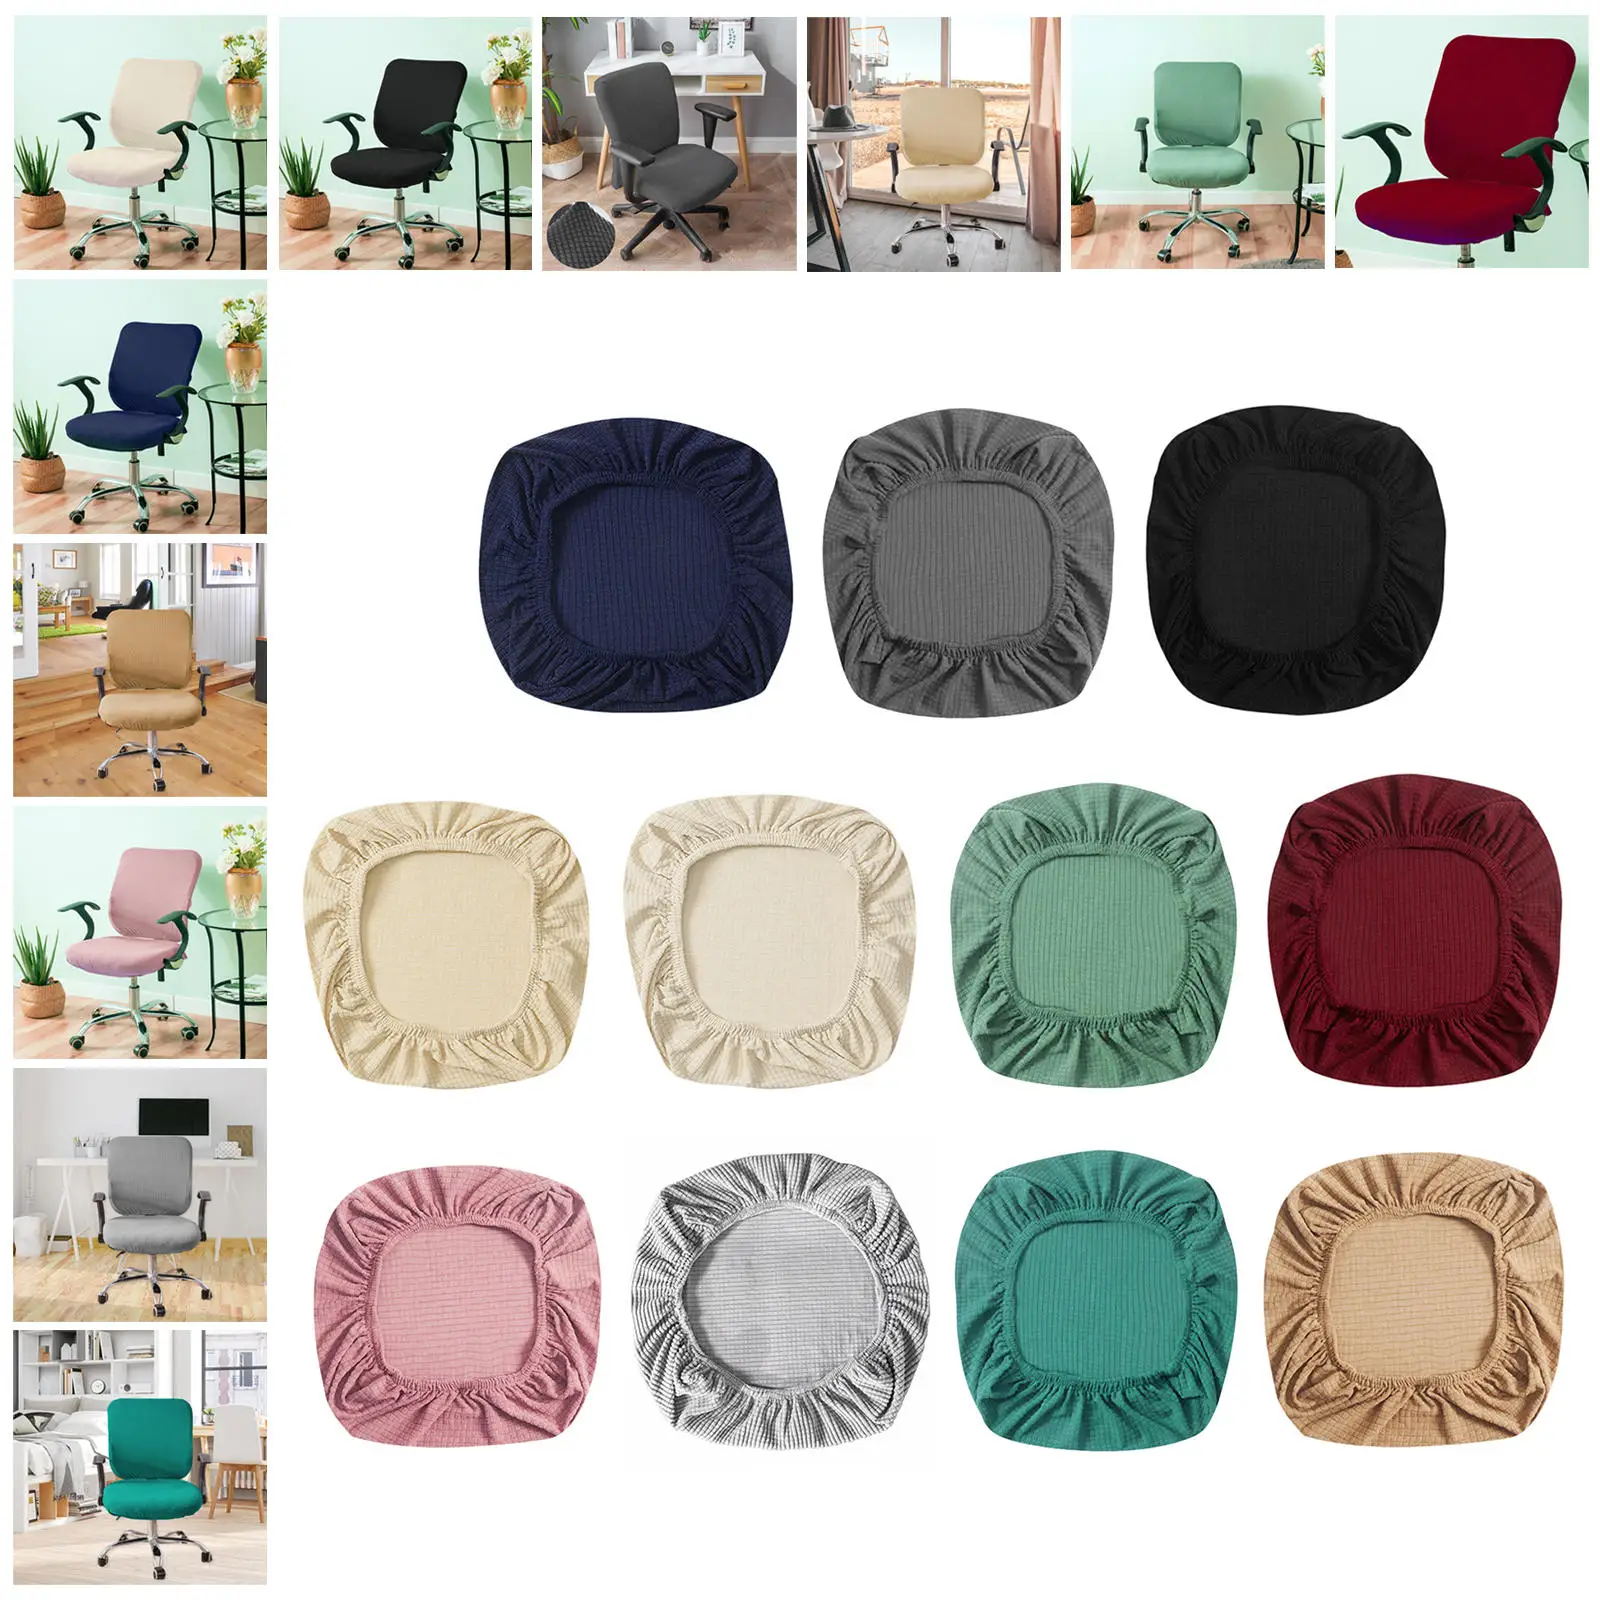 

Office Chair Cover Water Resistant Stretch Jacquard Elastic Covers for Desk Computer Chair Slipcover Stretchable